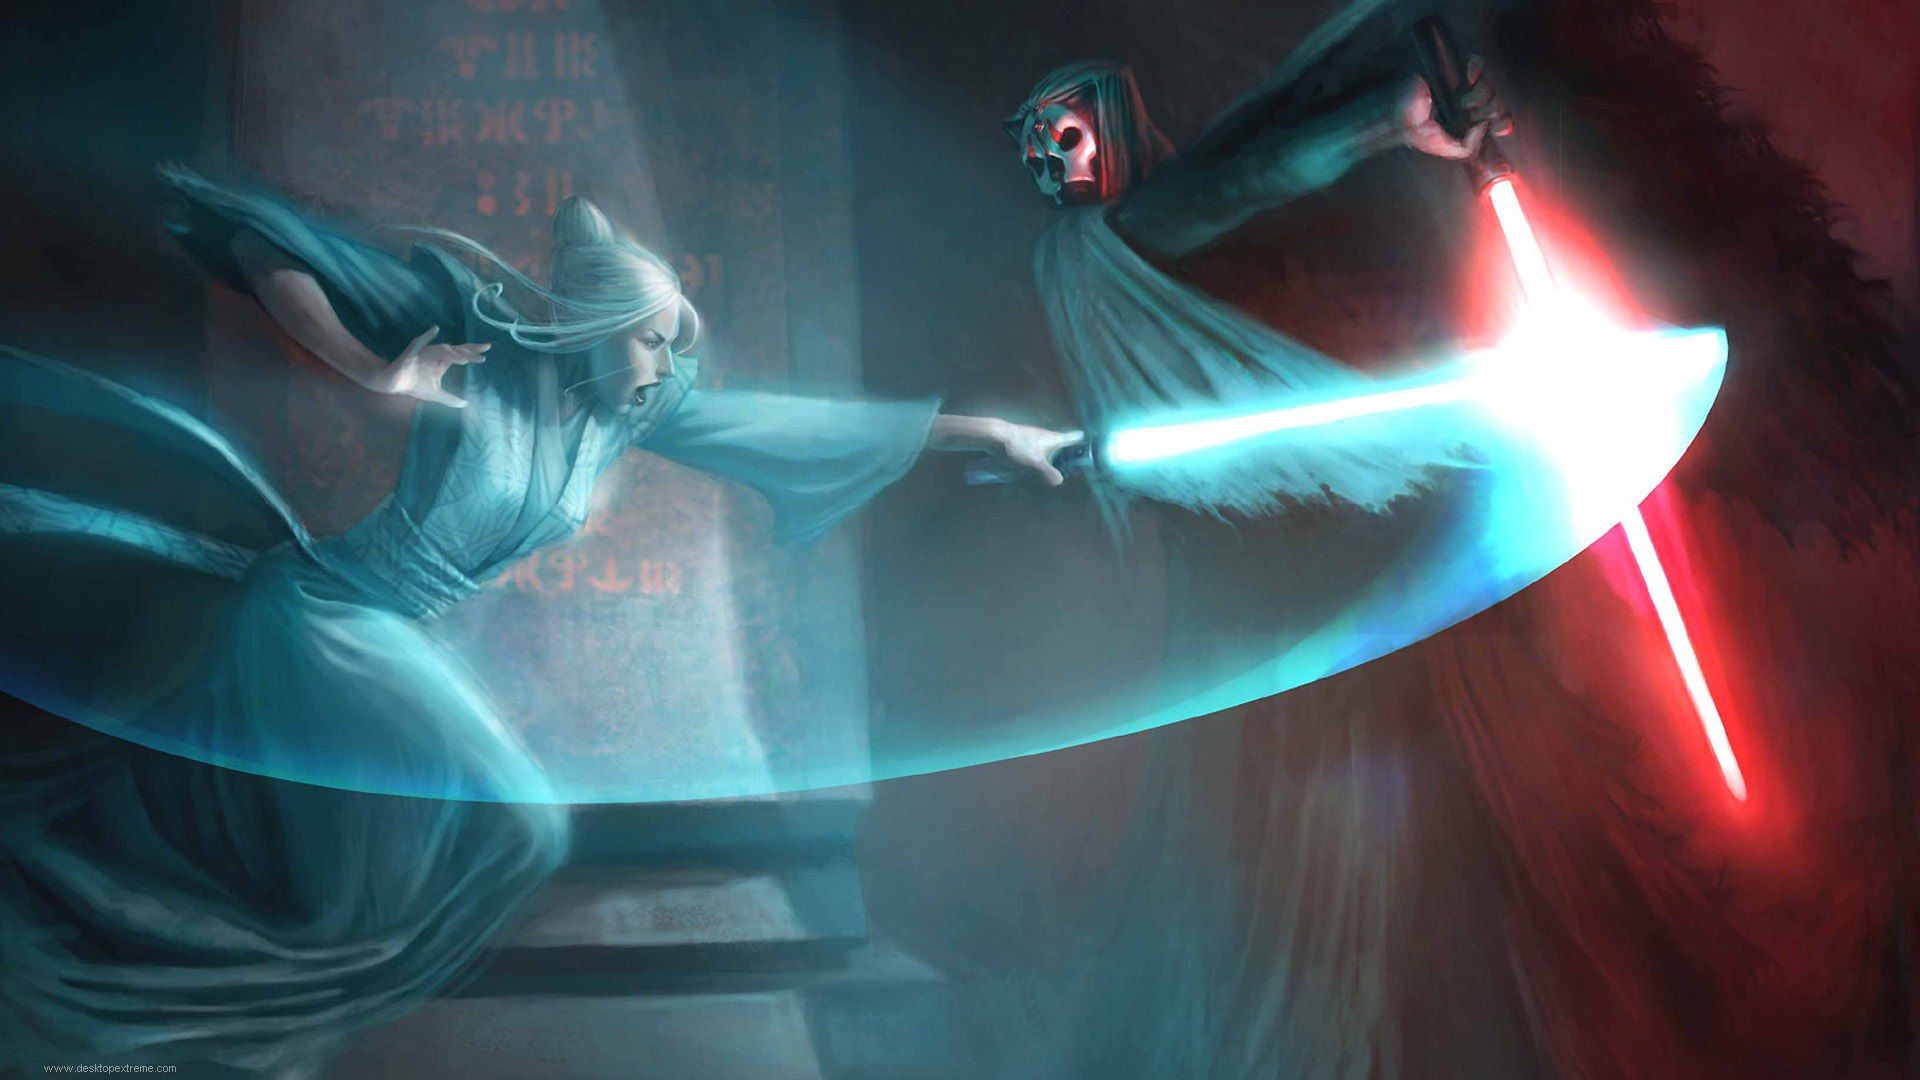 Star Wars Knights of the Old Republic Wallpapers